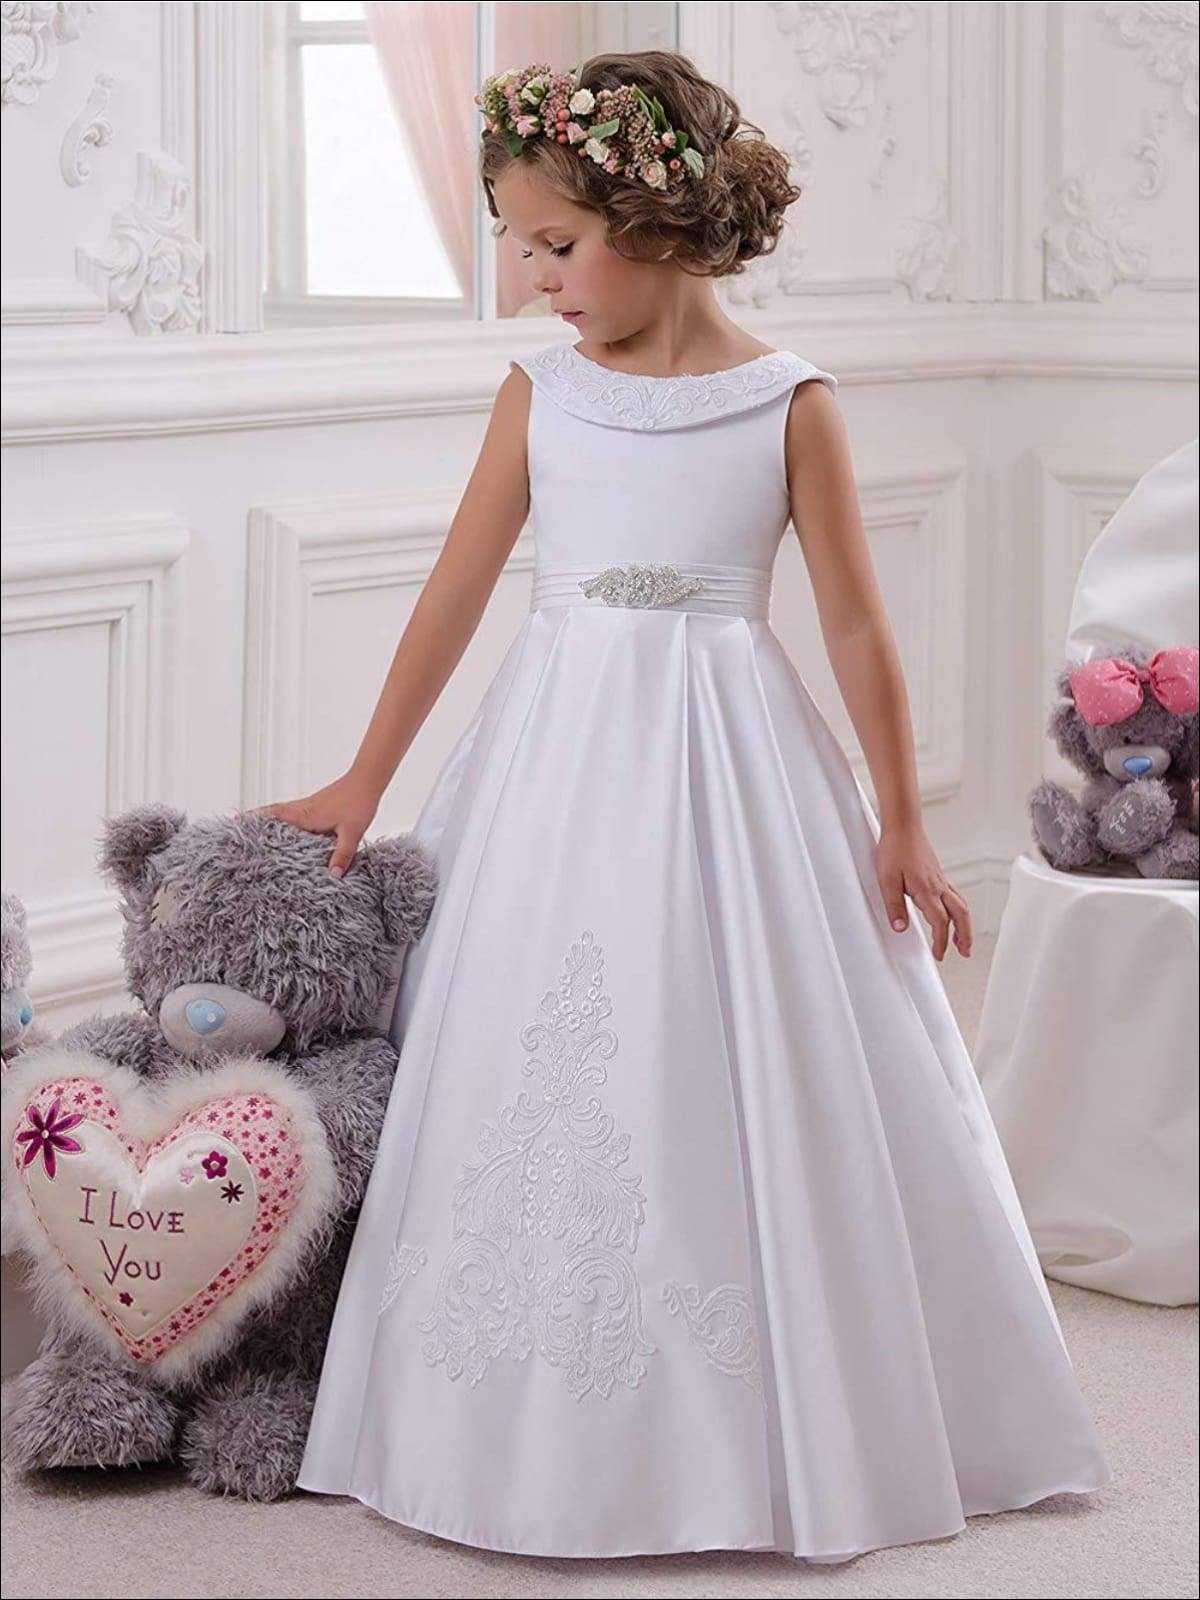 Girls Vintage Style Embellished Floor Length Gown with Crystal Applique - White / 2T - Girls Gown